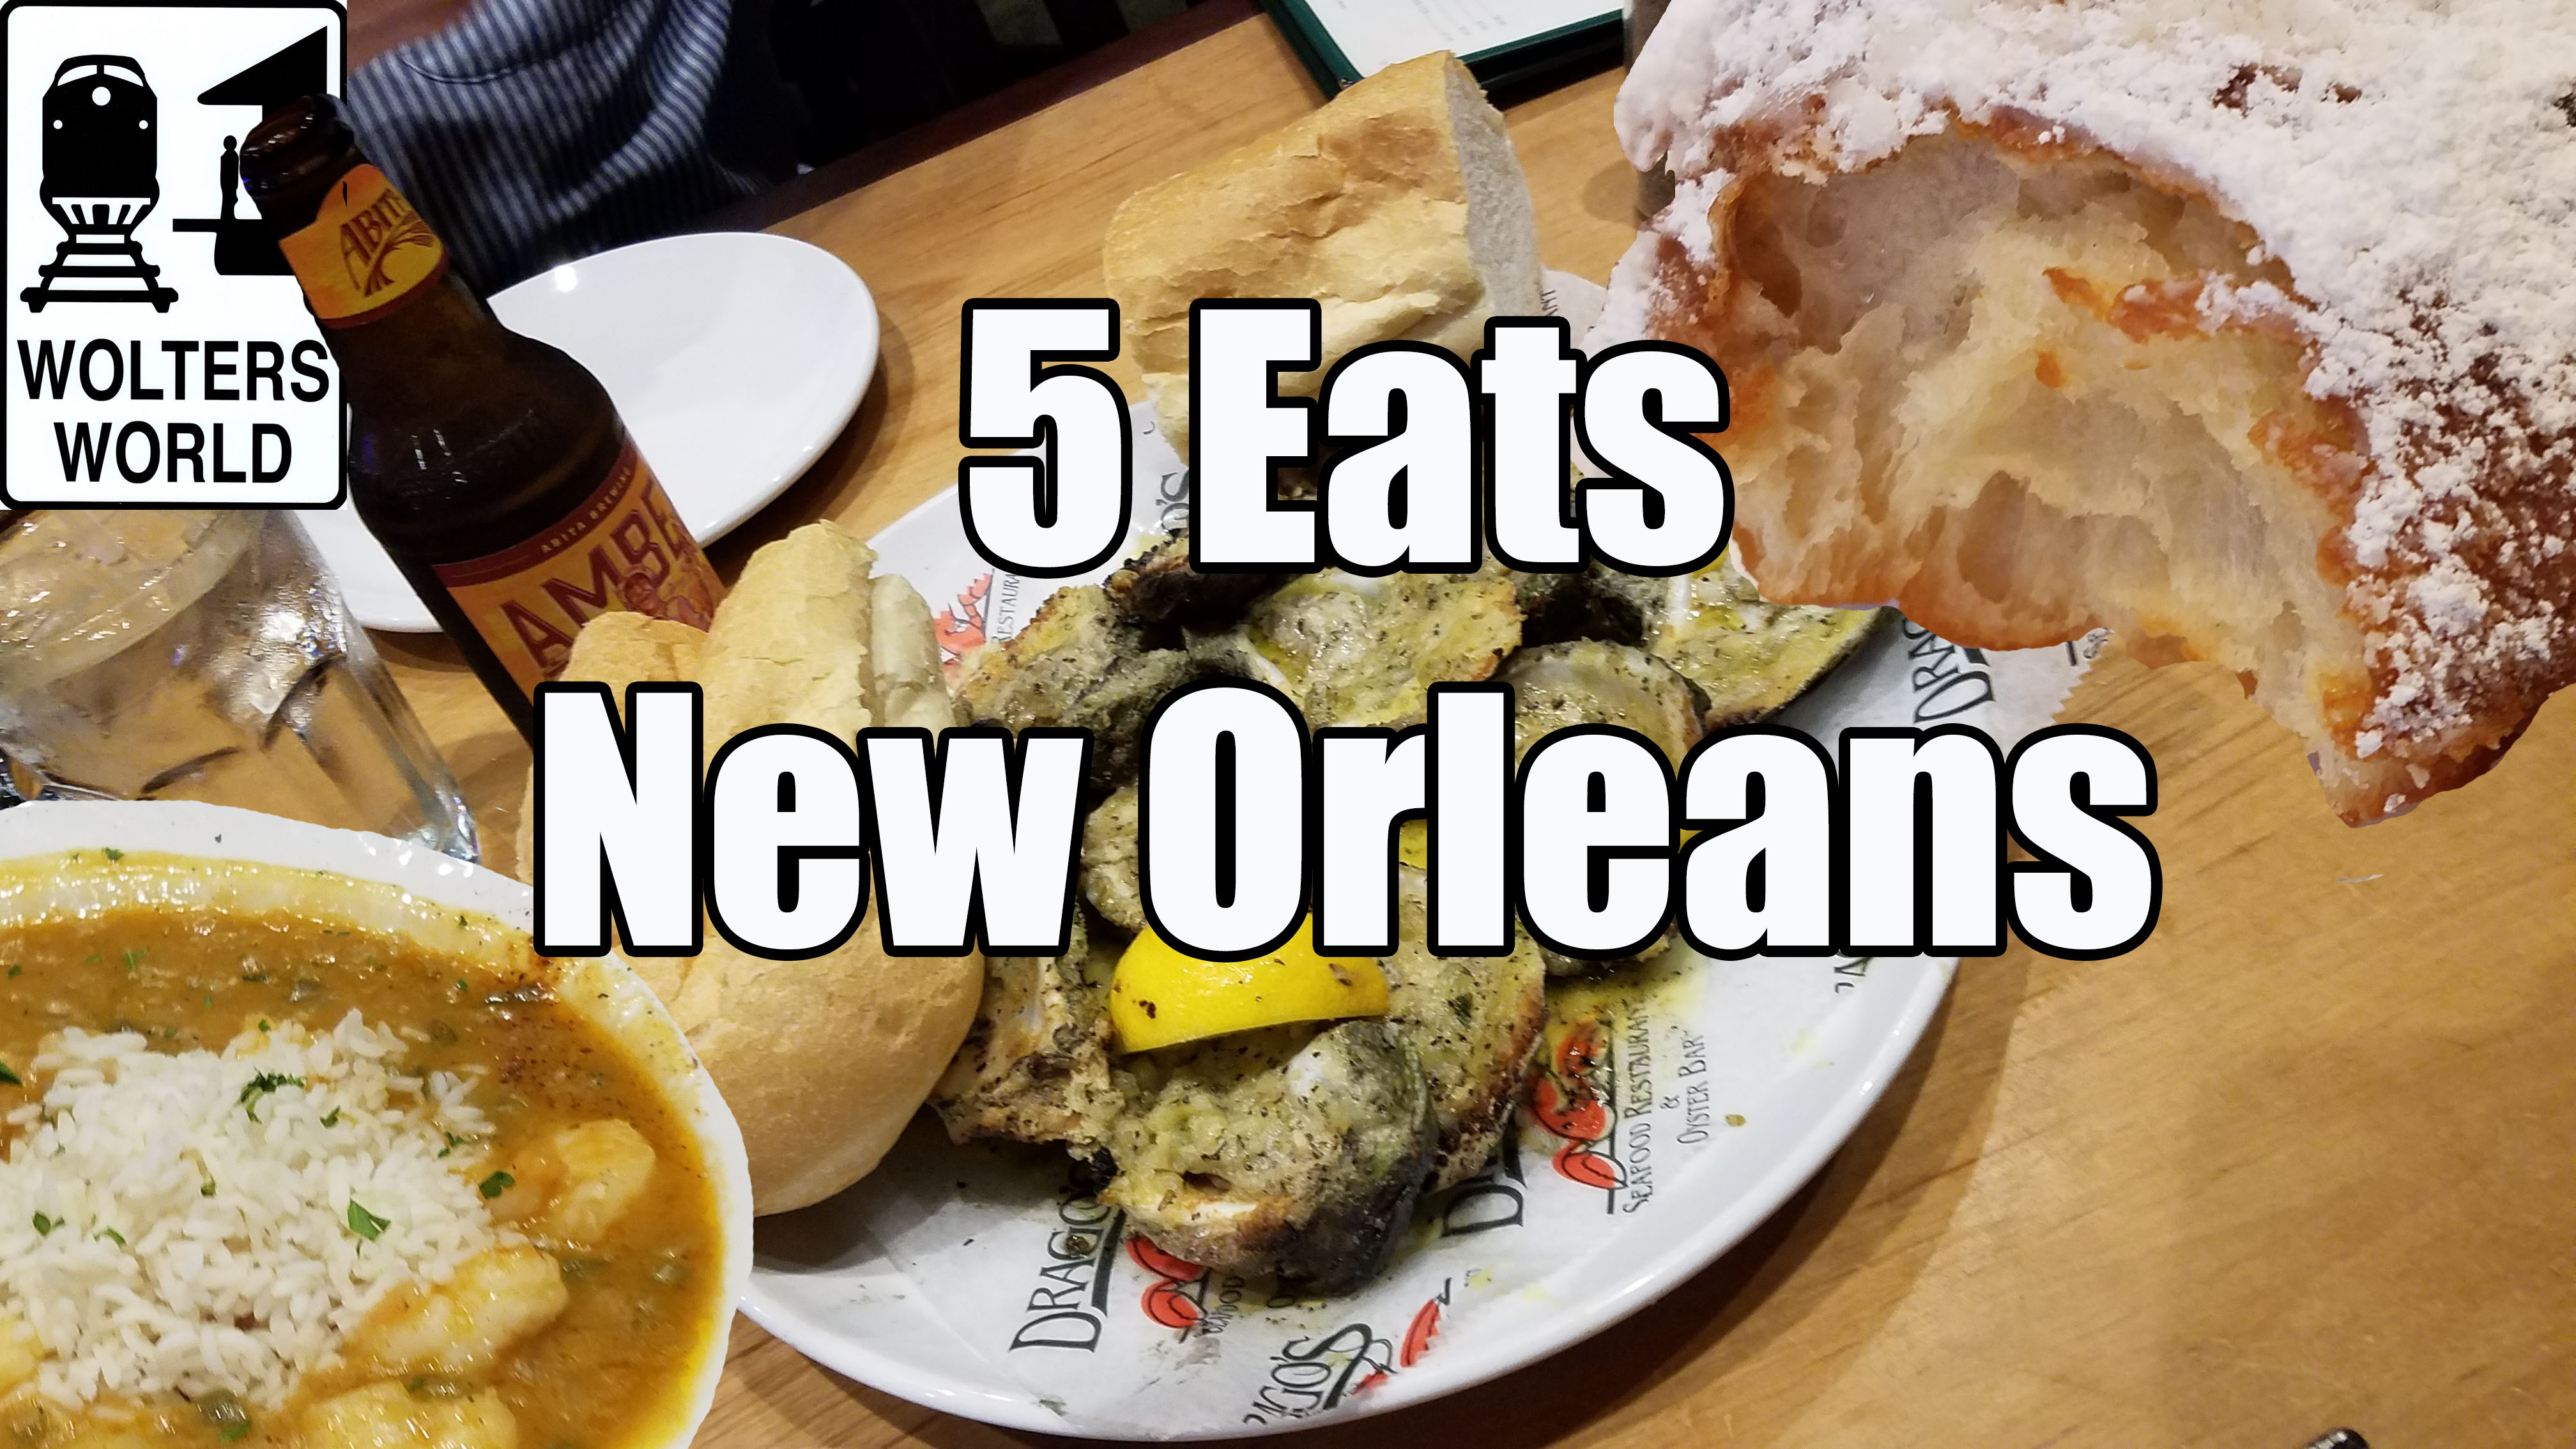 5 Things You MUST EAT in New Orleans Wolters World